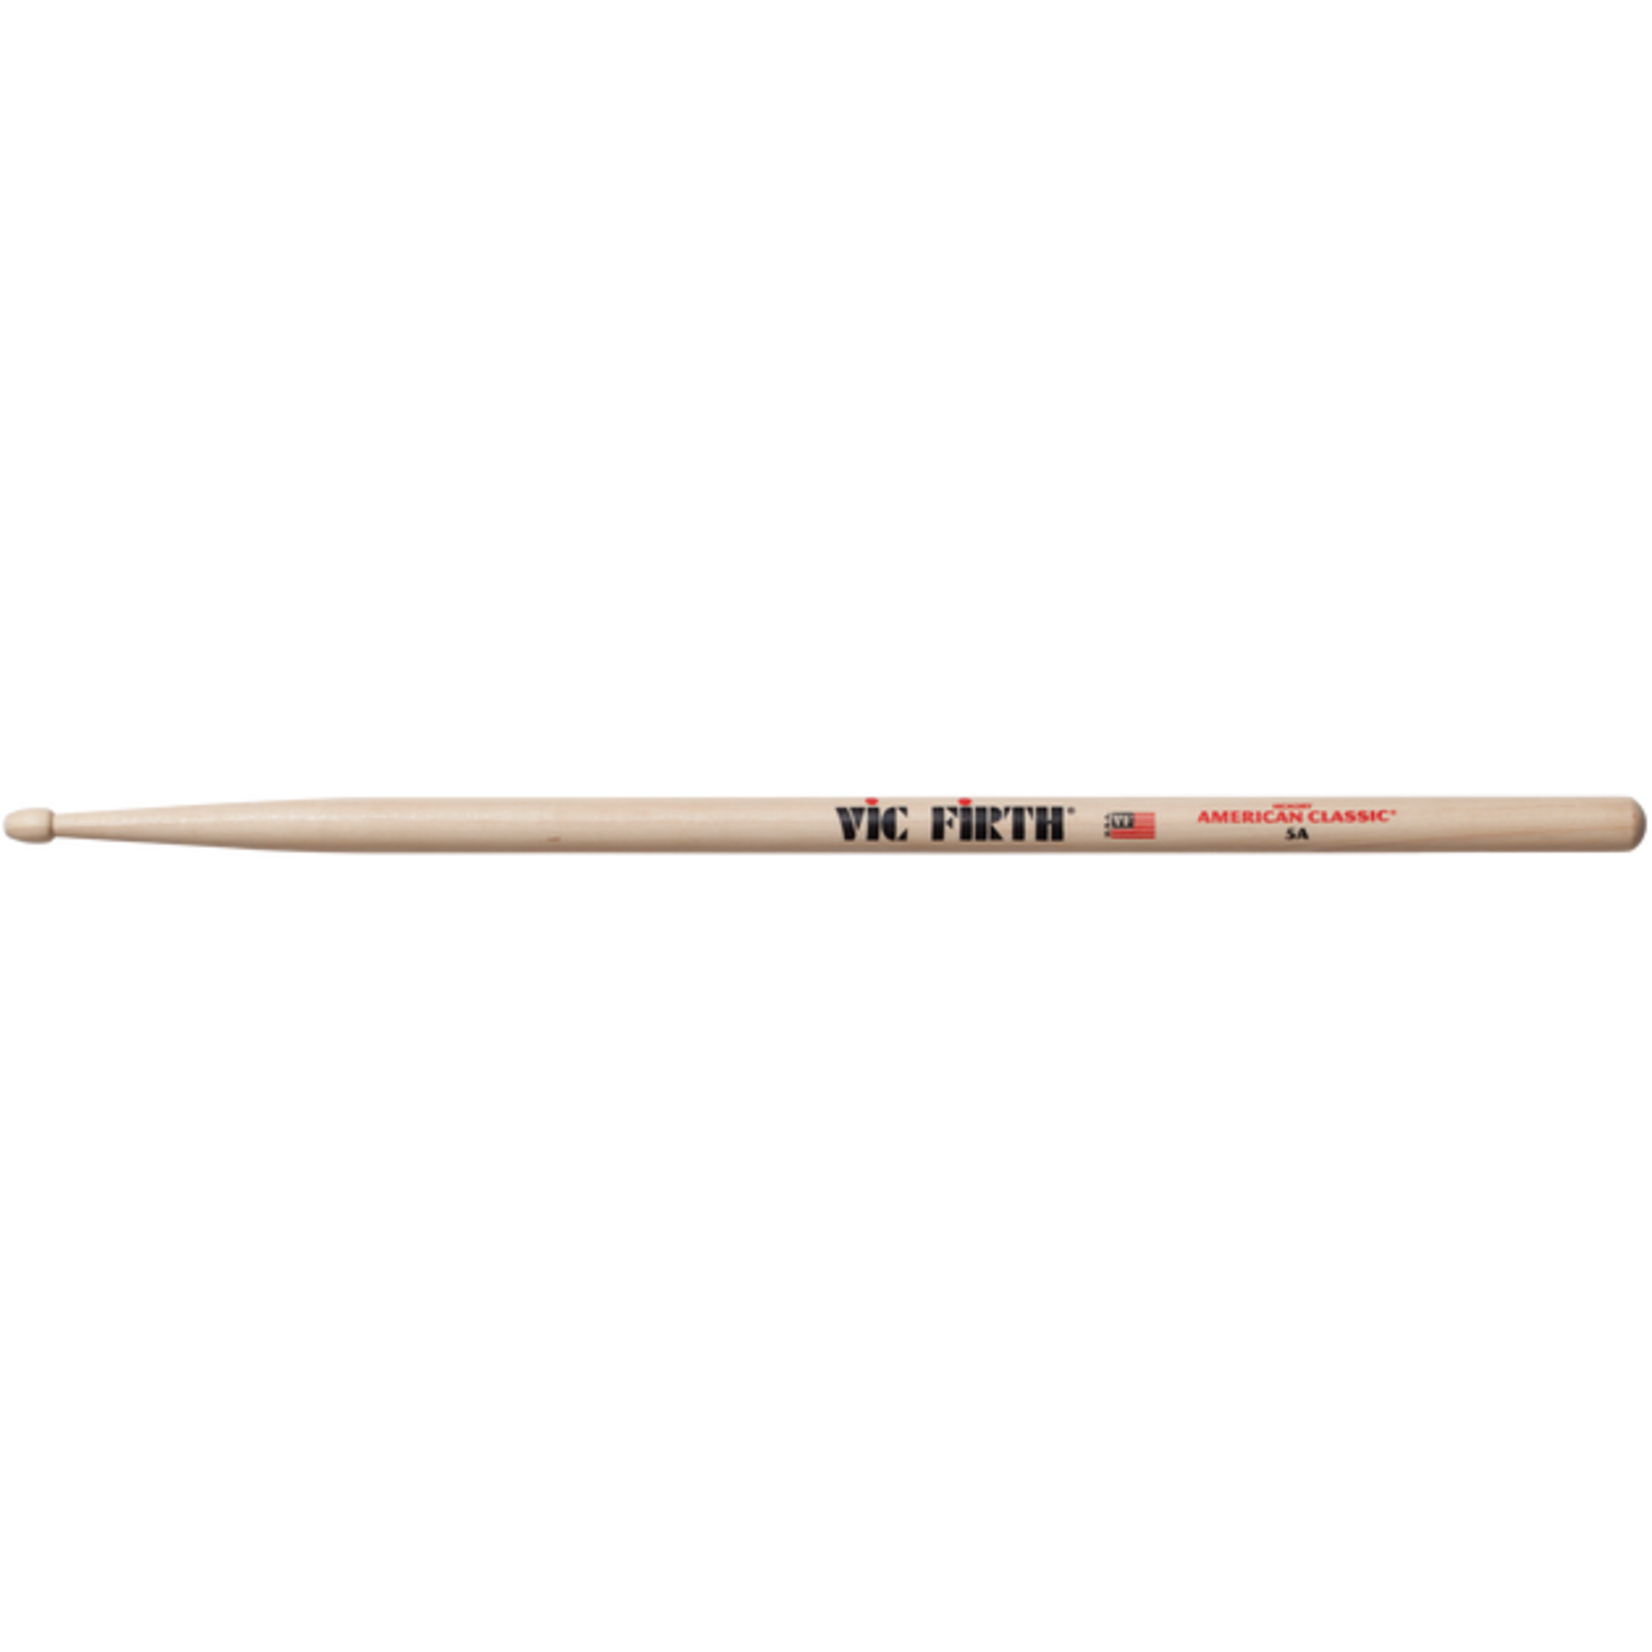 Vic Firth American Classic 5A Wood Tip Drumstick